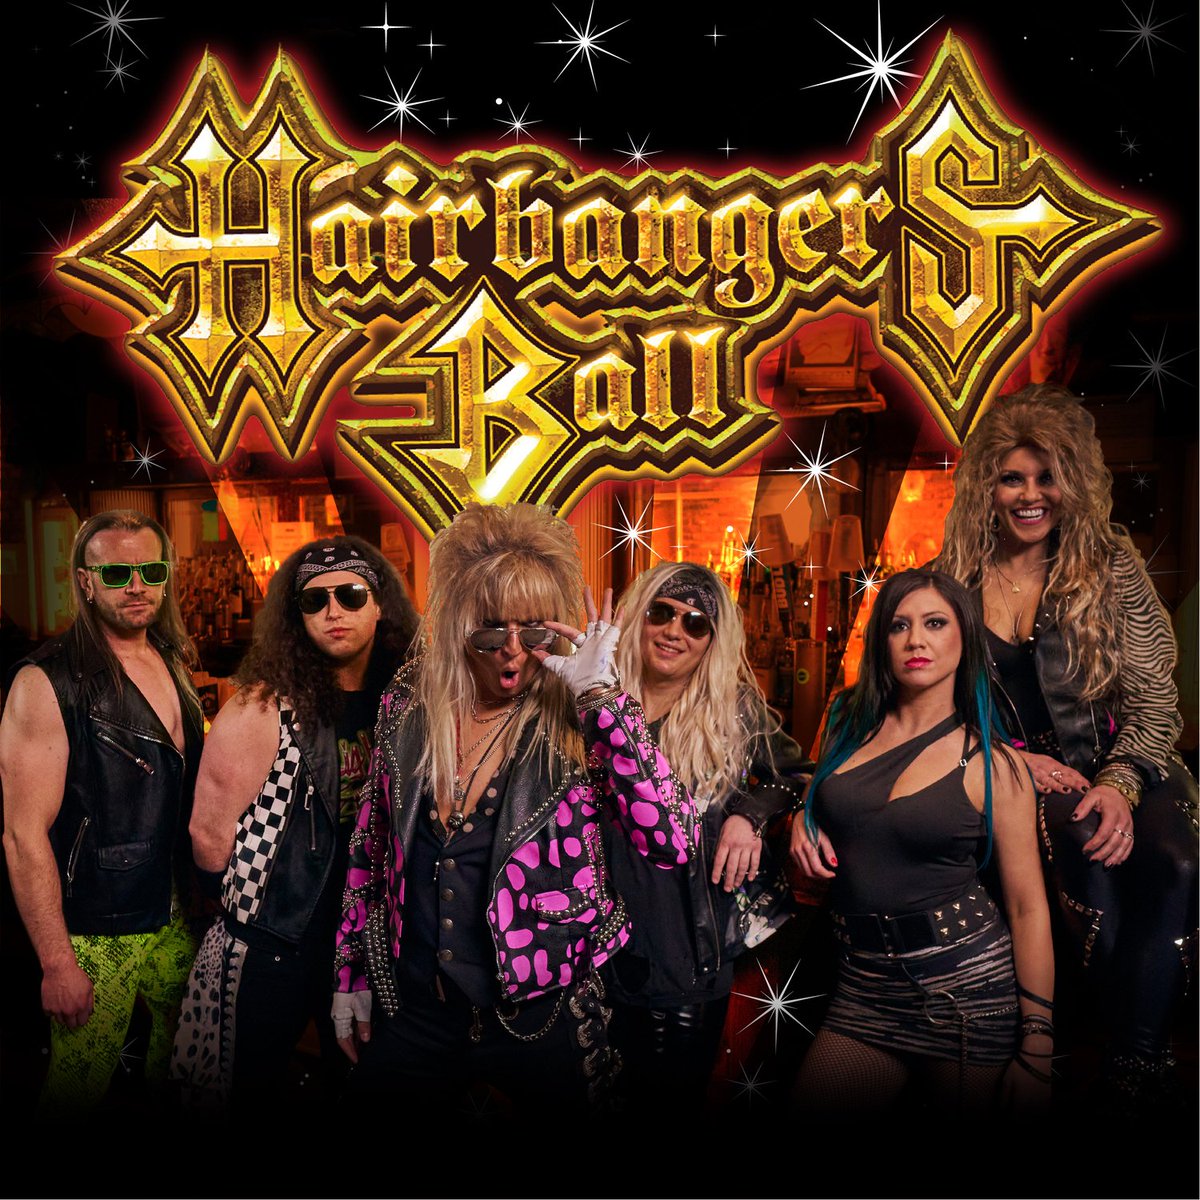 DON'T MISS: Who's ready to rock and roll?! Don't miss out on a live performance from @Hairbangersball THIS Friday, Jan. 28 at #TheVogueIndy! 🤘 🎟️ Tickets available NOW at TheVogue.com